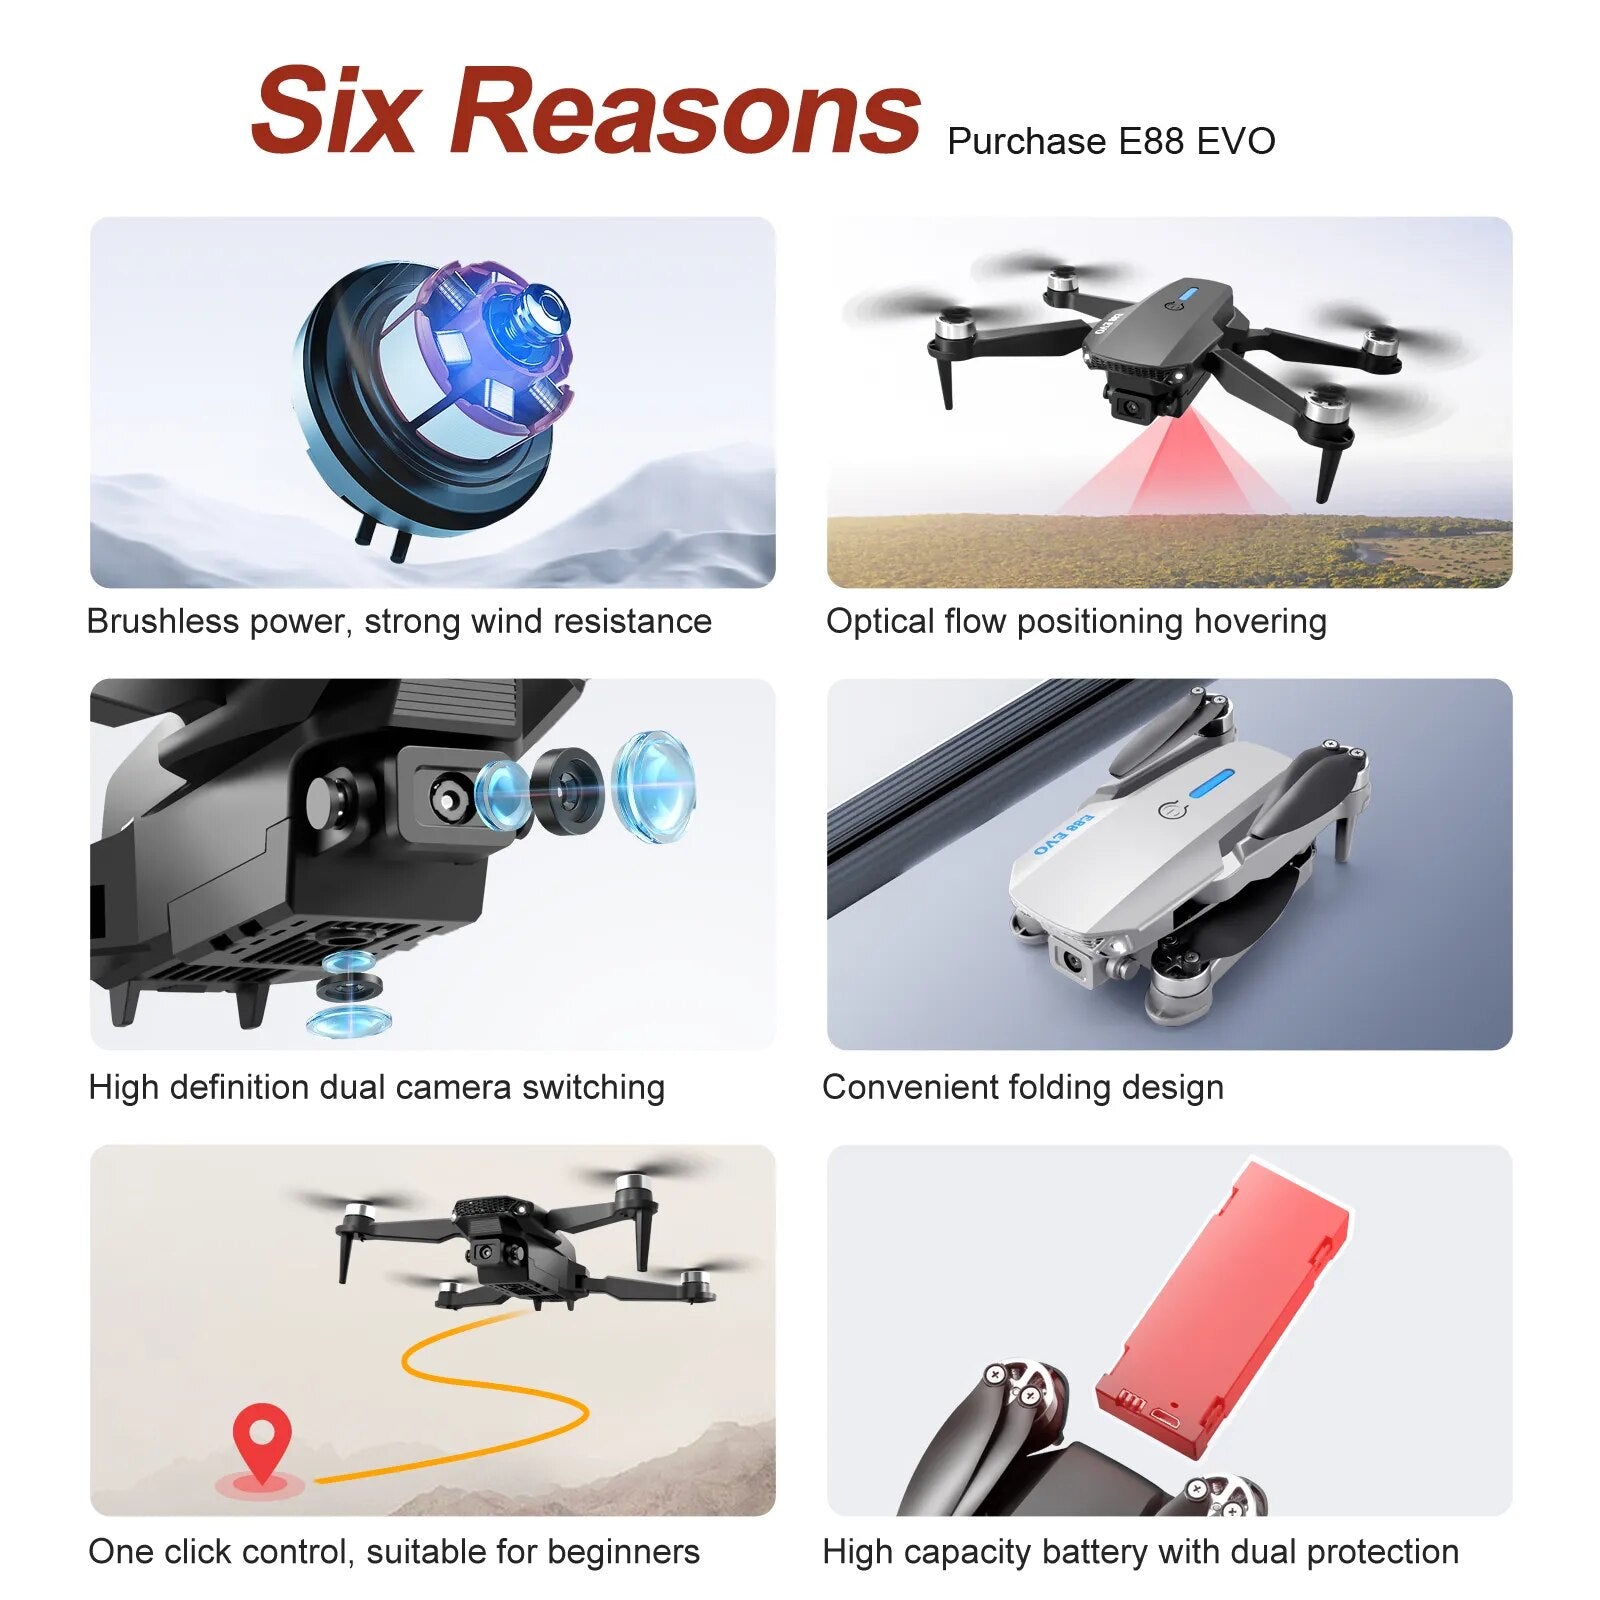 FPV Wifi RC Drone with HD Camera 4K - Foldable Quadcopter Selfie 1080P Remote